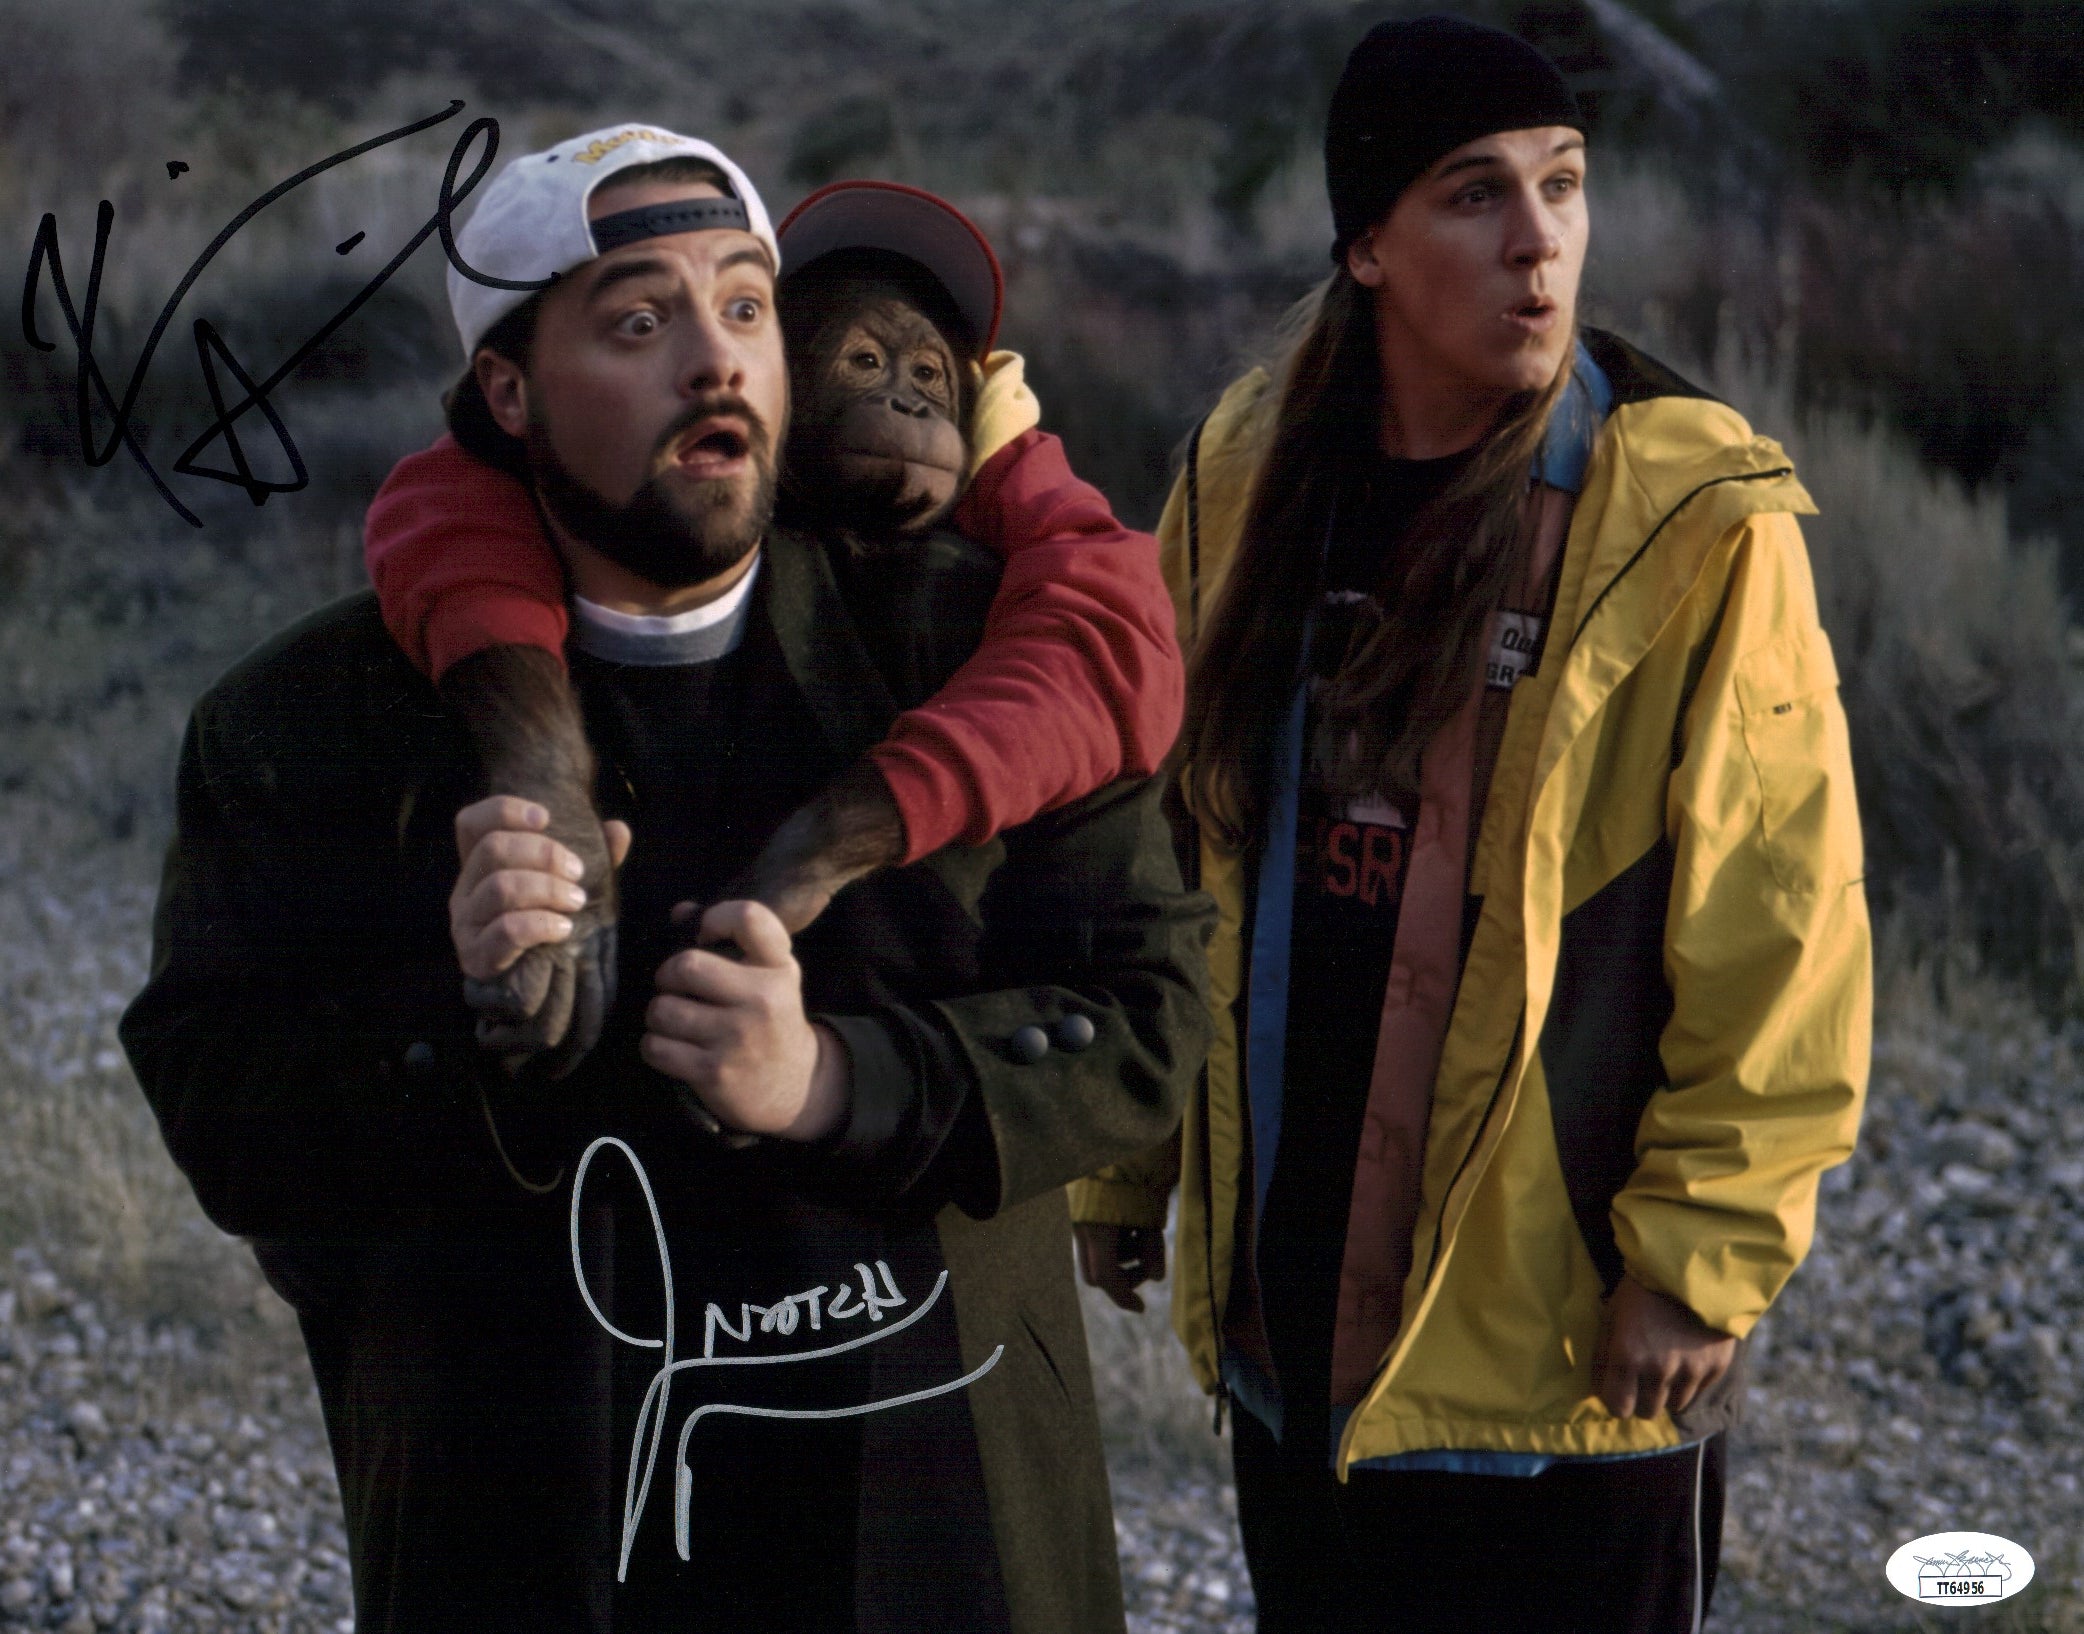 Jay and Silent Bob Strike Back 11x14 Photo Poster Mewes Smith Signed Autograph JSA Certified COA